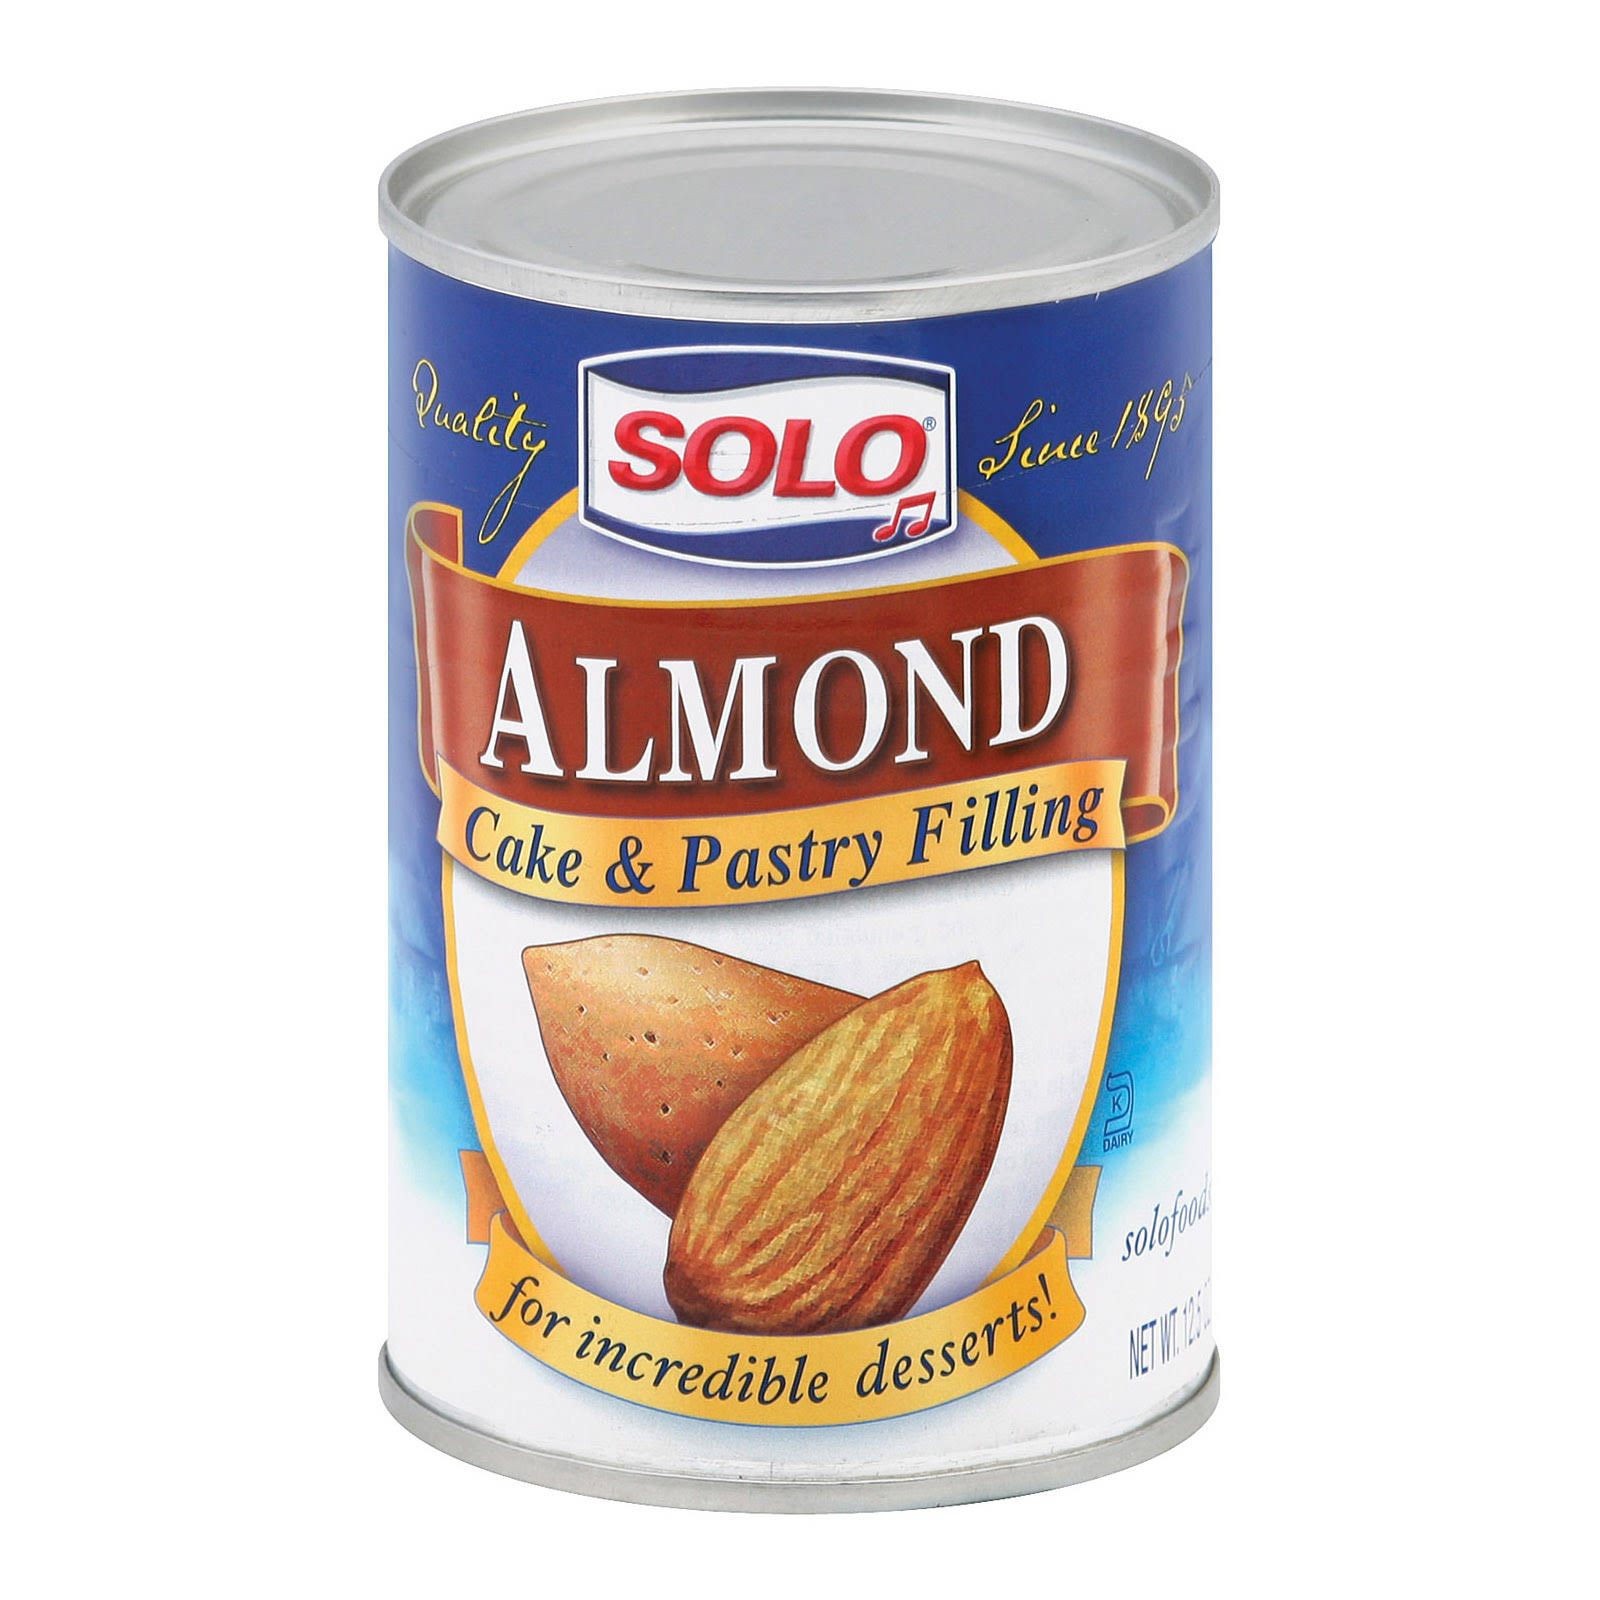 Solo Almond Cake and Pastry Filling - 12.5 oz